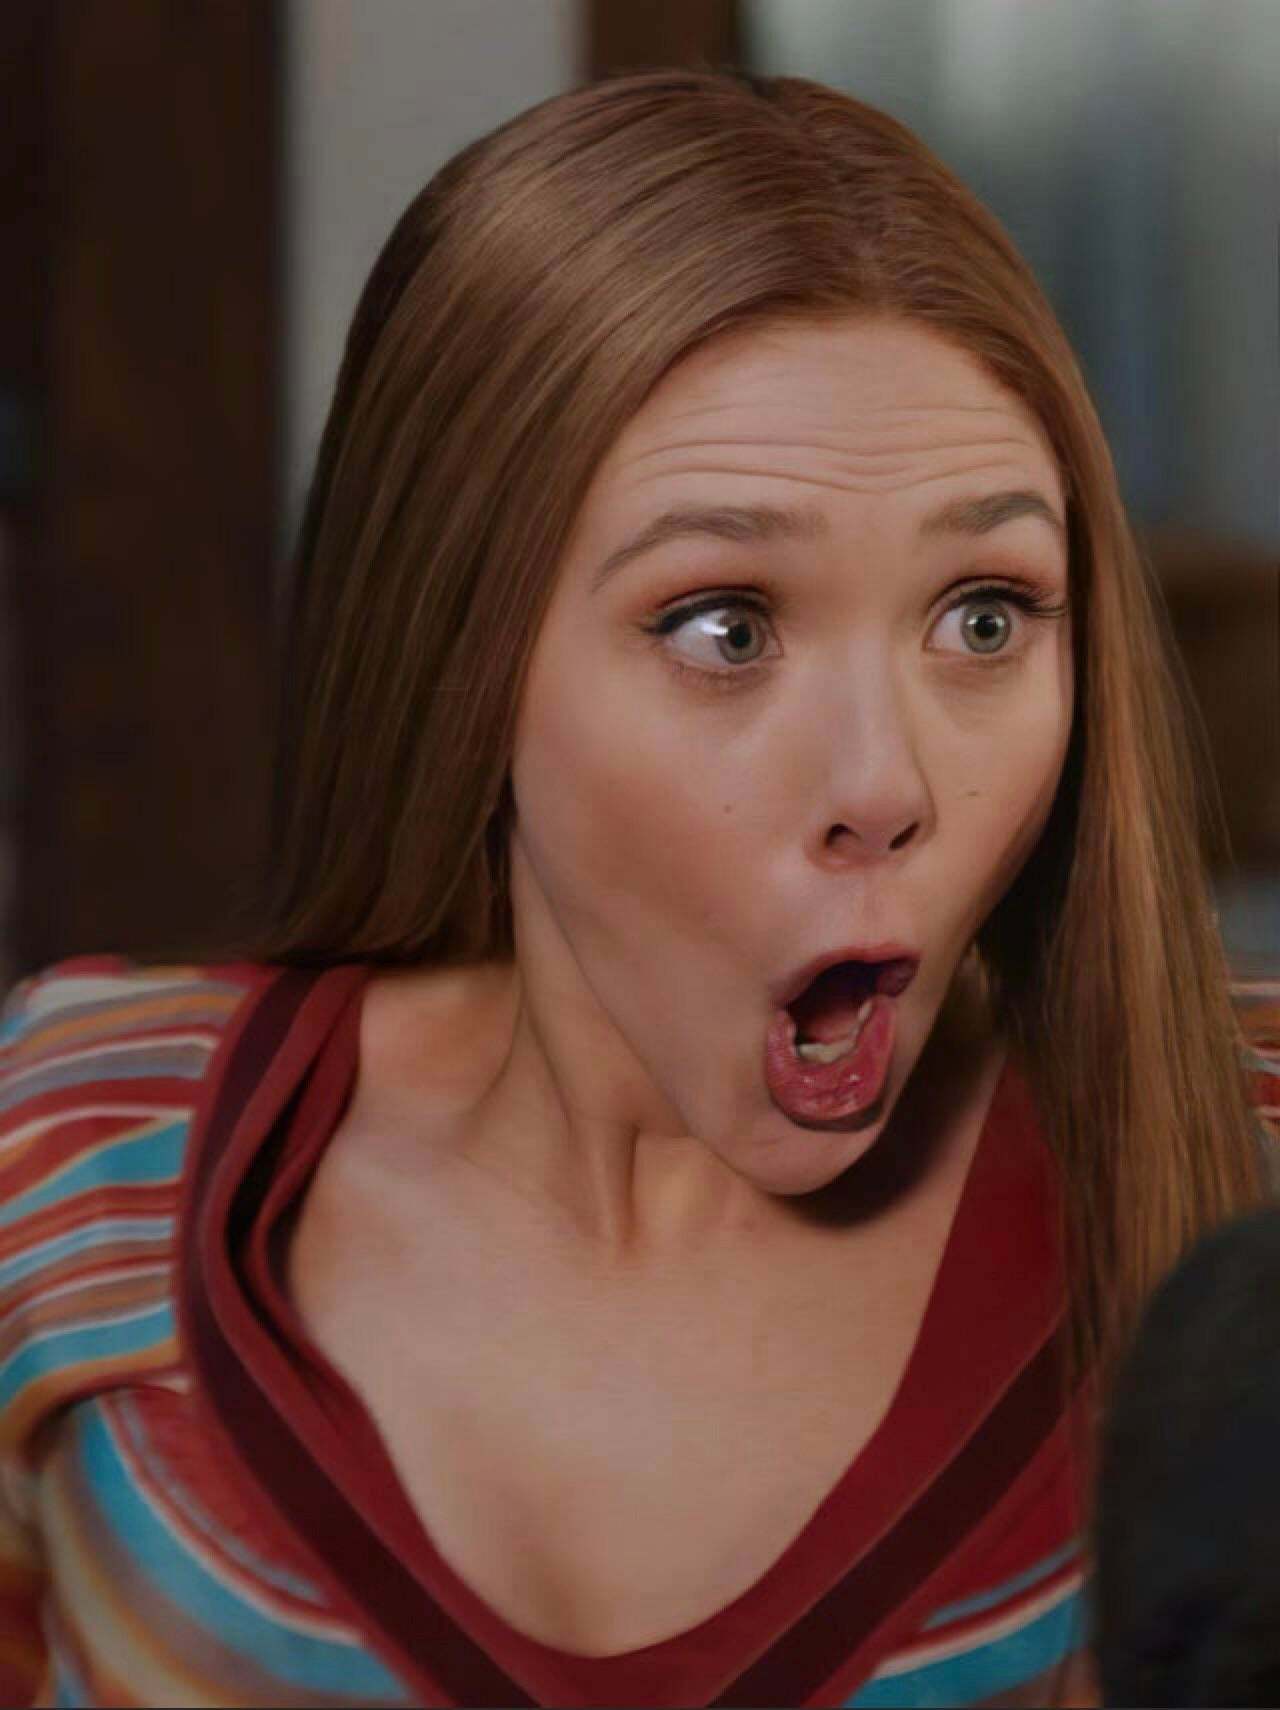 POV Elizabeth Olsen seeing the size of your cock